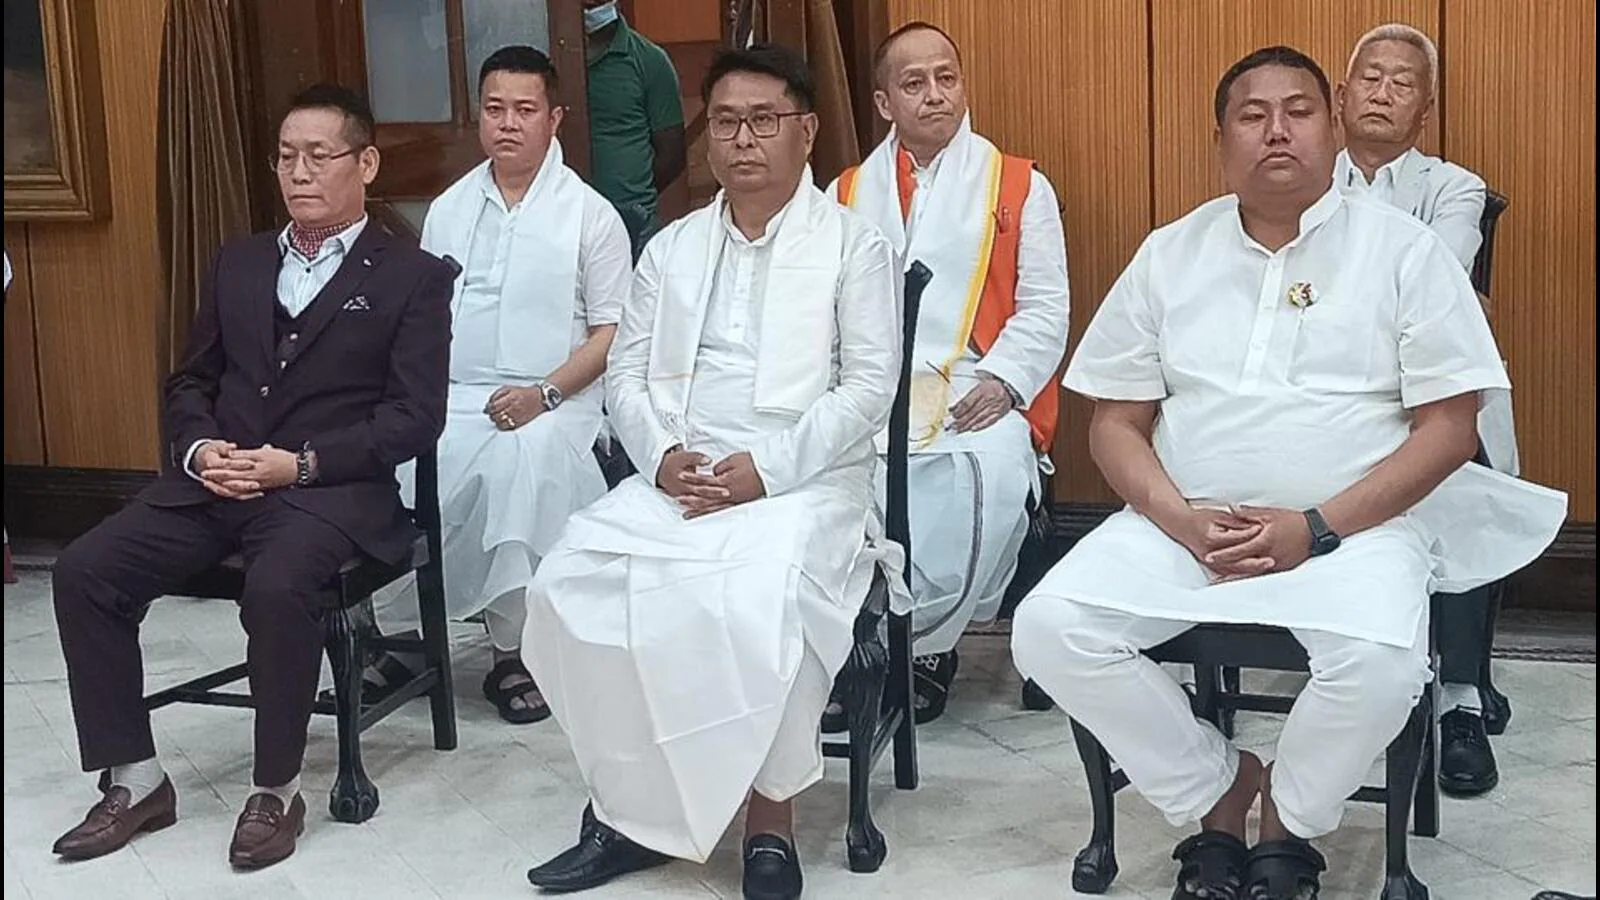 In Manipur, CM N Biren Singh expands cabinet; adds 6 more ministers